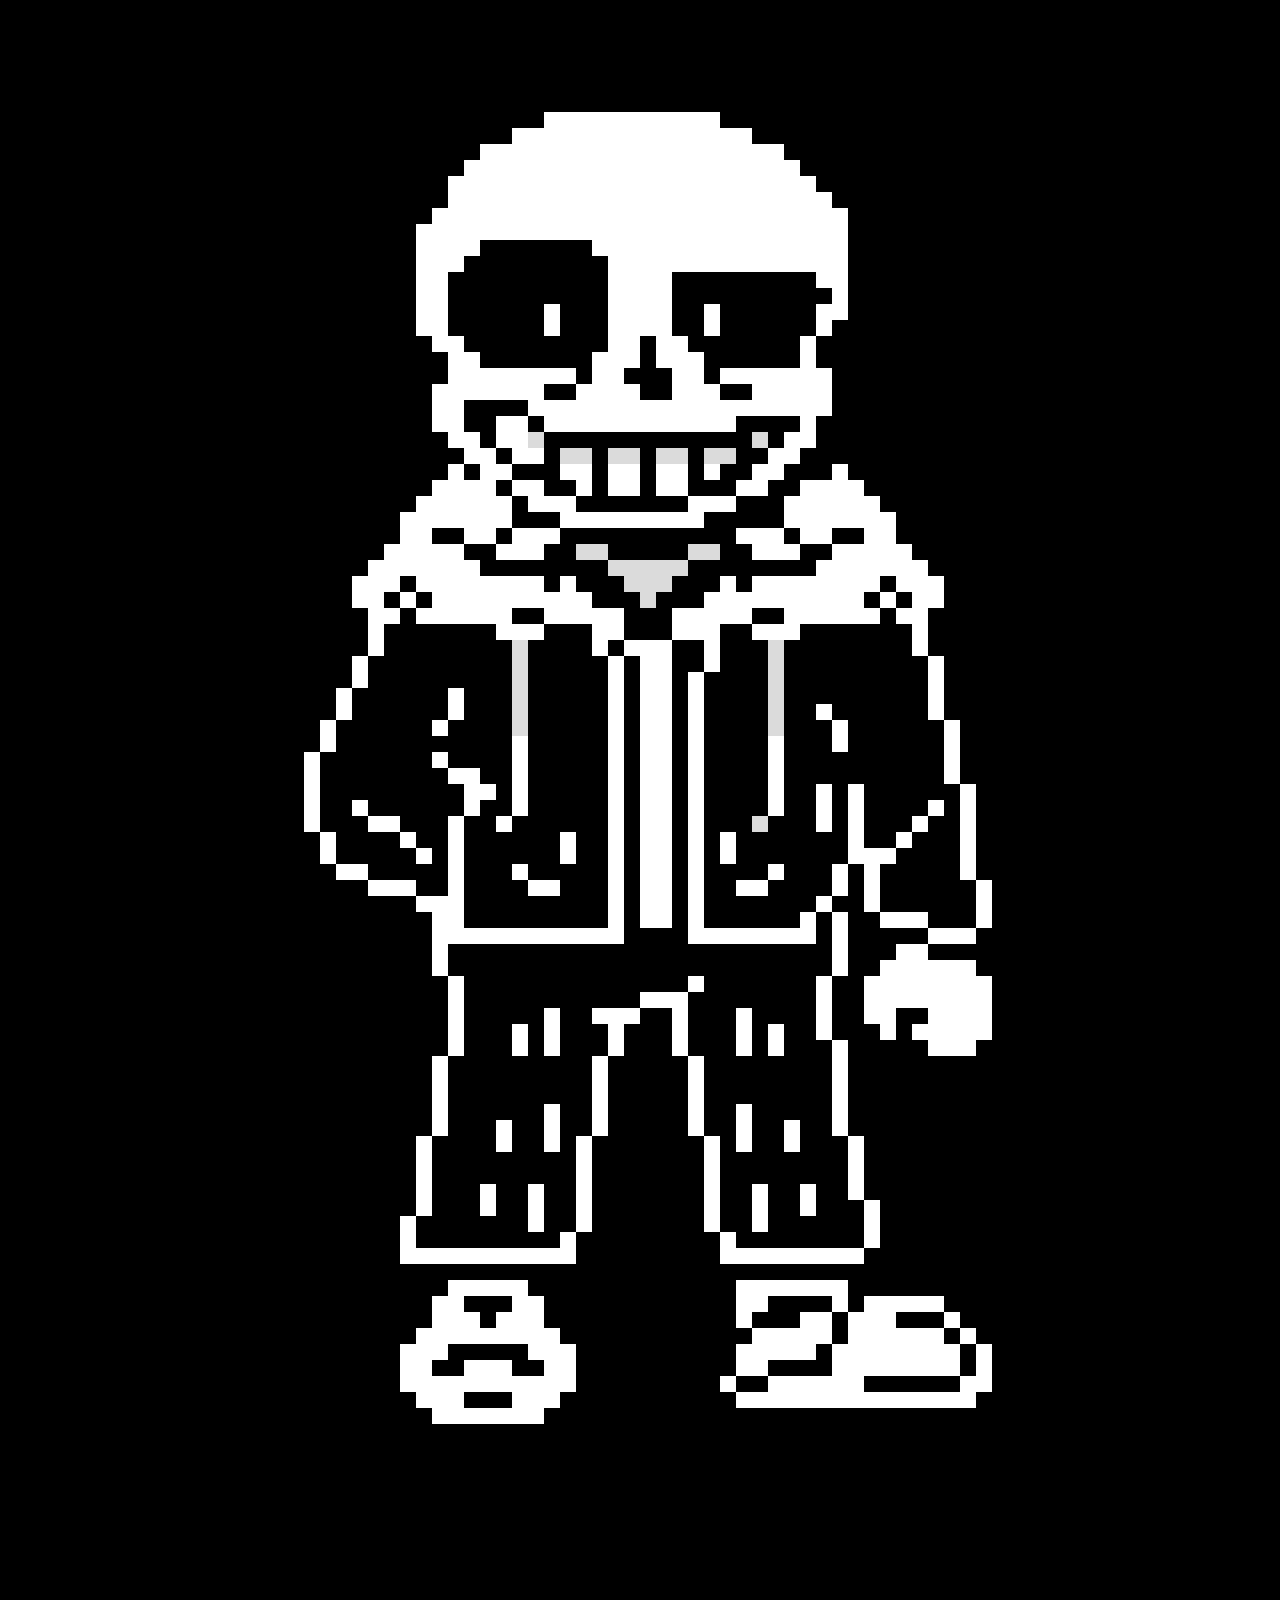 Undertale: The Running Joke Sans (This is a base for me to edit)